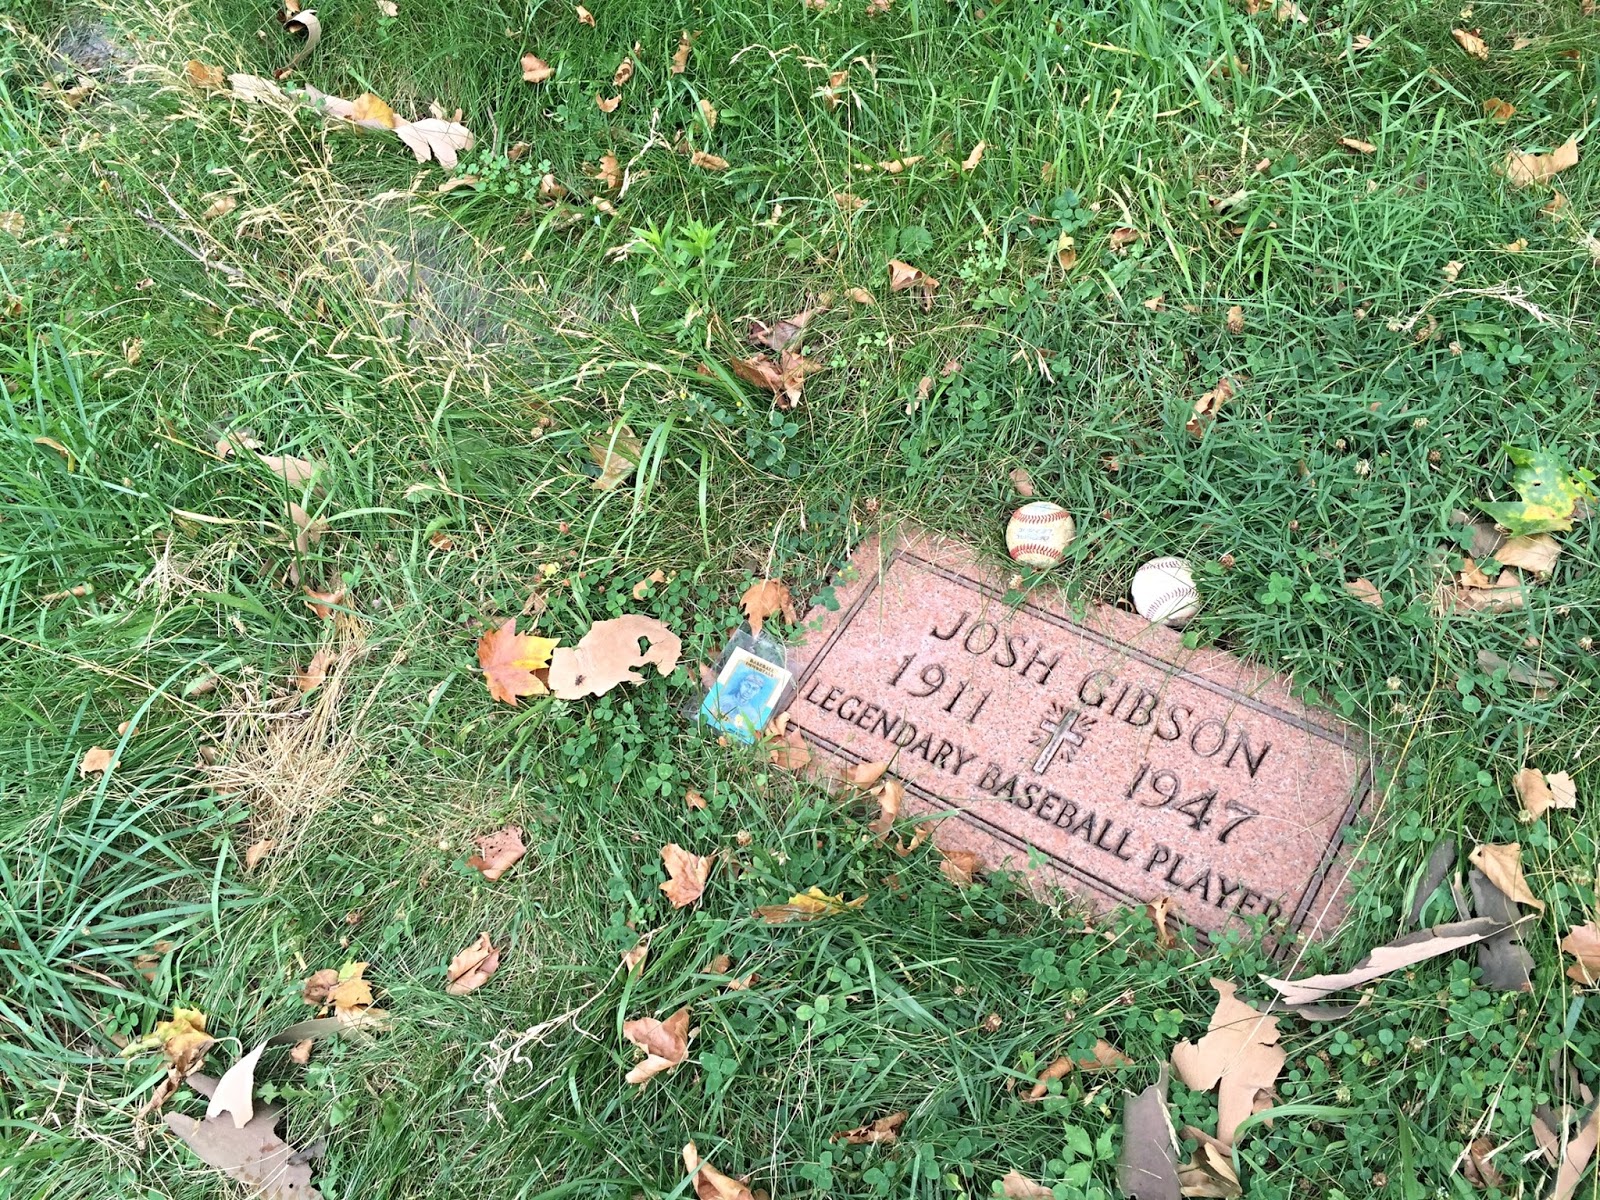 Epiphany in Baltimore: Visiting Josh Gibson's Grave in Pittsburgh  (Including Video)